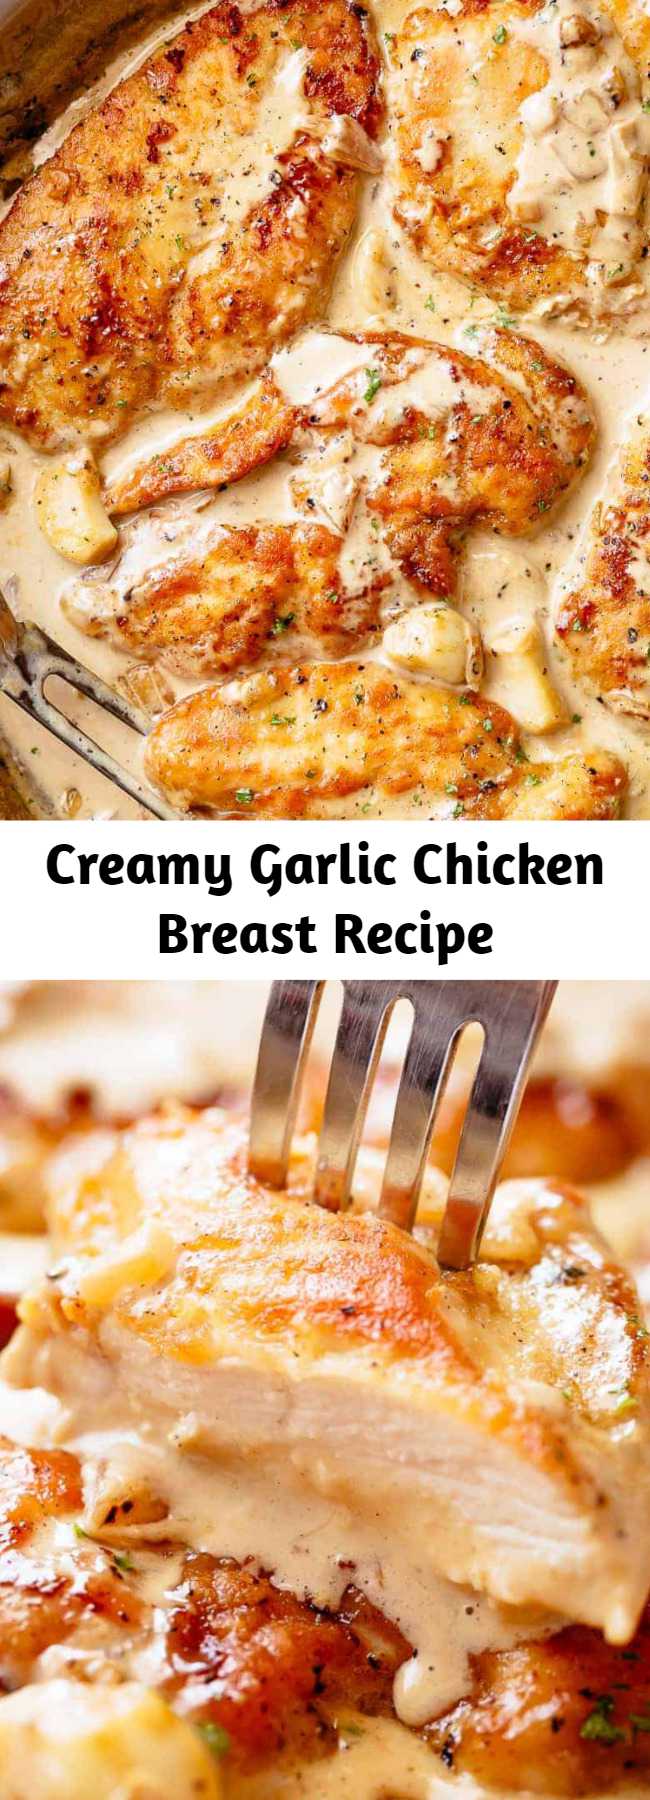 Creamy Garlic Chicken Breast Recipe - Lightly floured boneless chicken breasts are pan fried in until golden and crispy before being added to a mouth-watering garlic cream sauce! Filled with caramelized flavour, you will LOVE how easy this is!